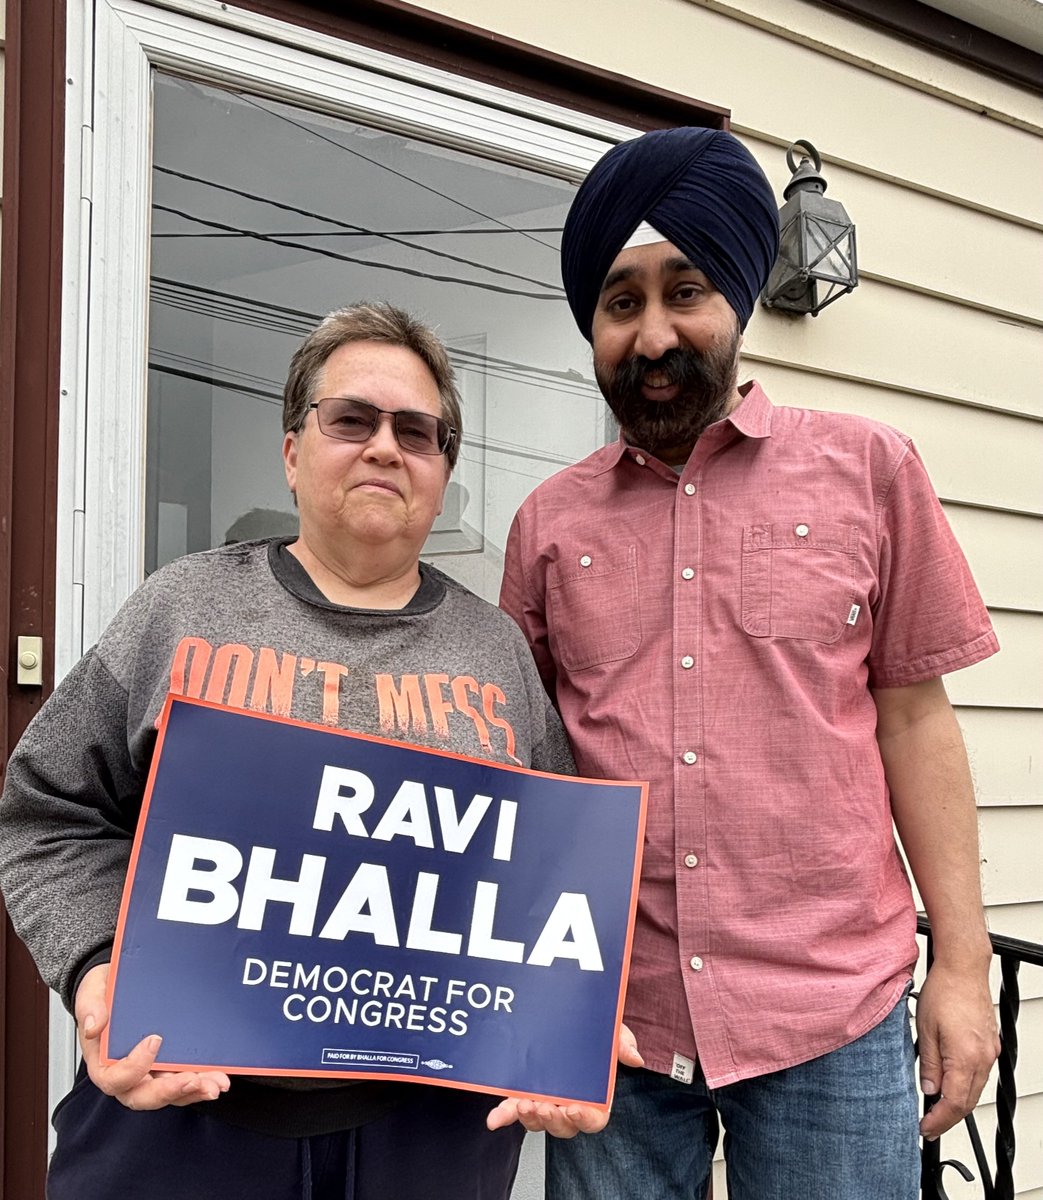 Here’s why Kathleen, a Bayonne resident, supports our campaign: 'I support Ravi because he looks out for the little guy, not special interests, and he’s right on the important issues like the Turnpike extension.” Thank you Kathleen!